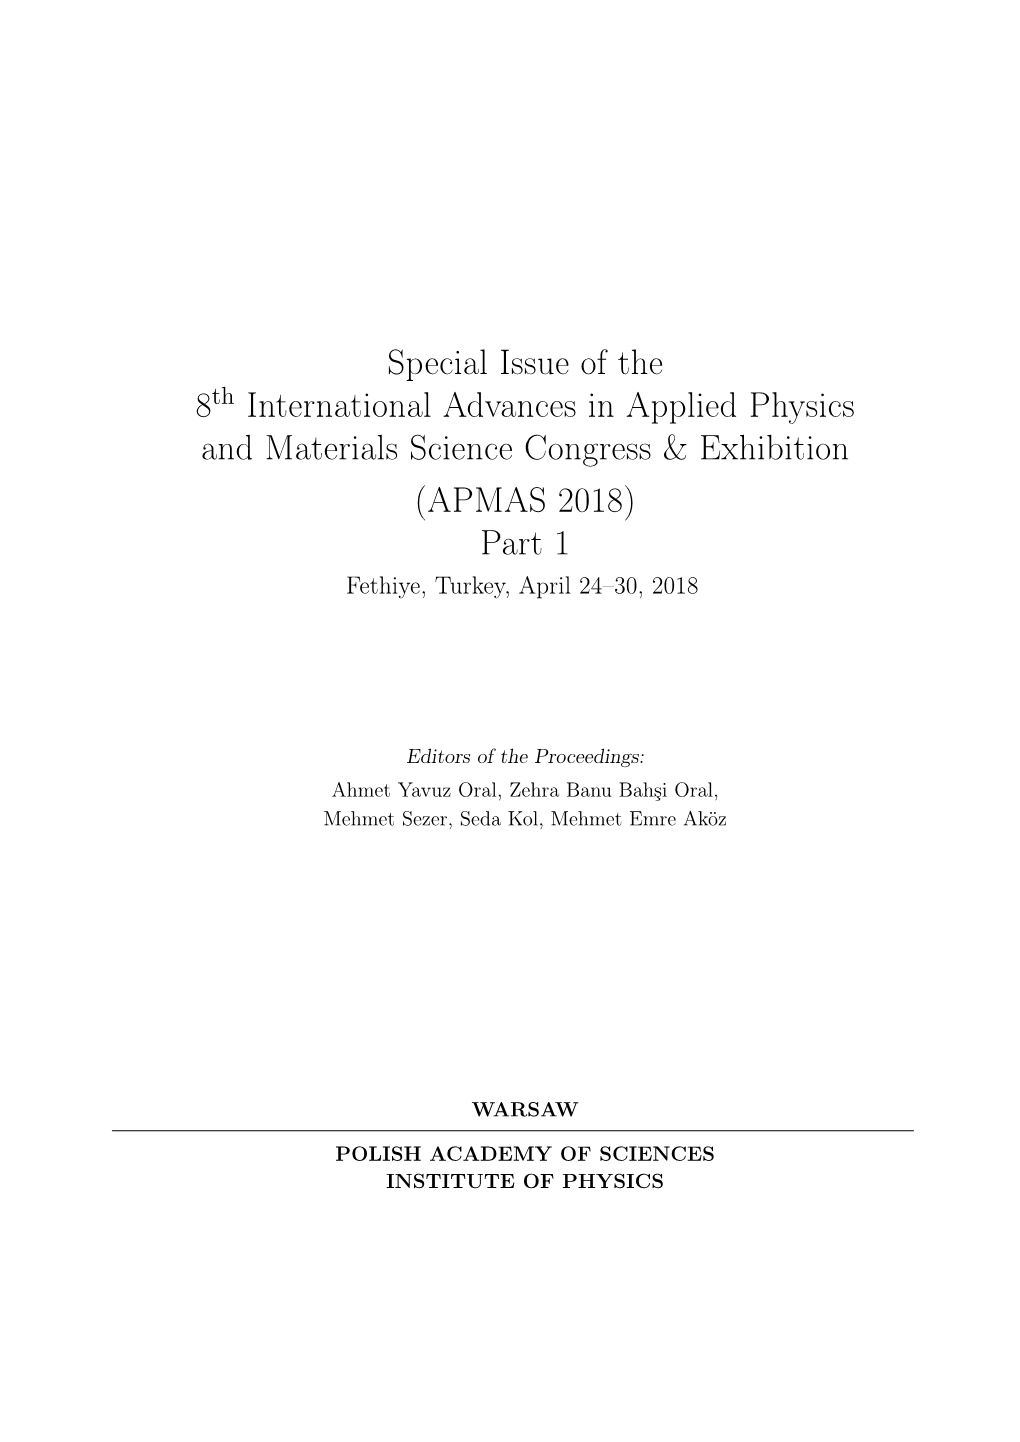 Special Issue of the 8 International Advances in Applied Physics And